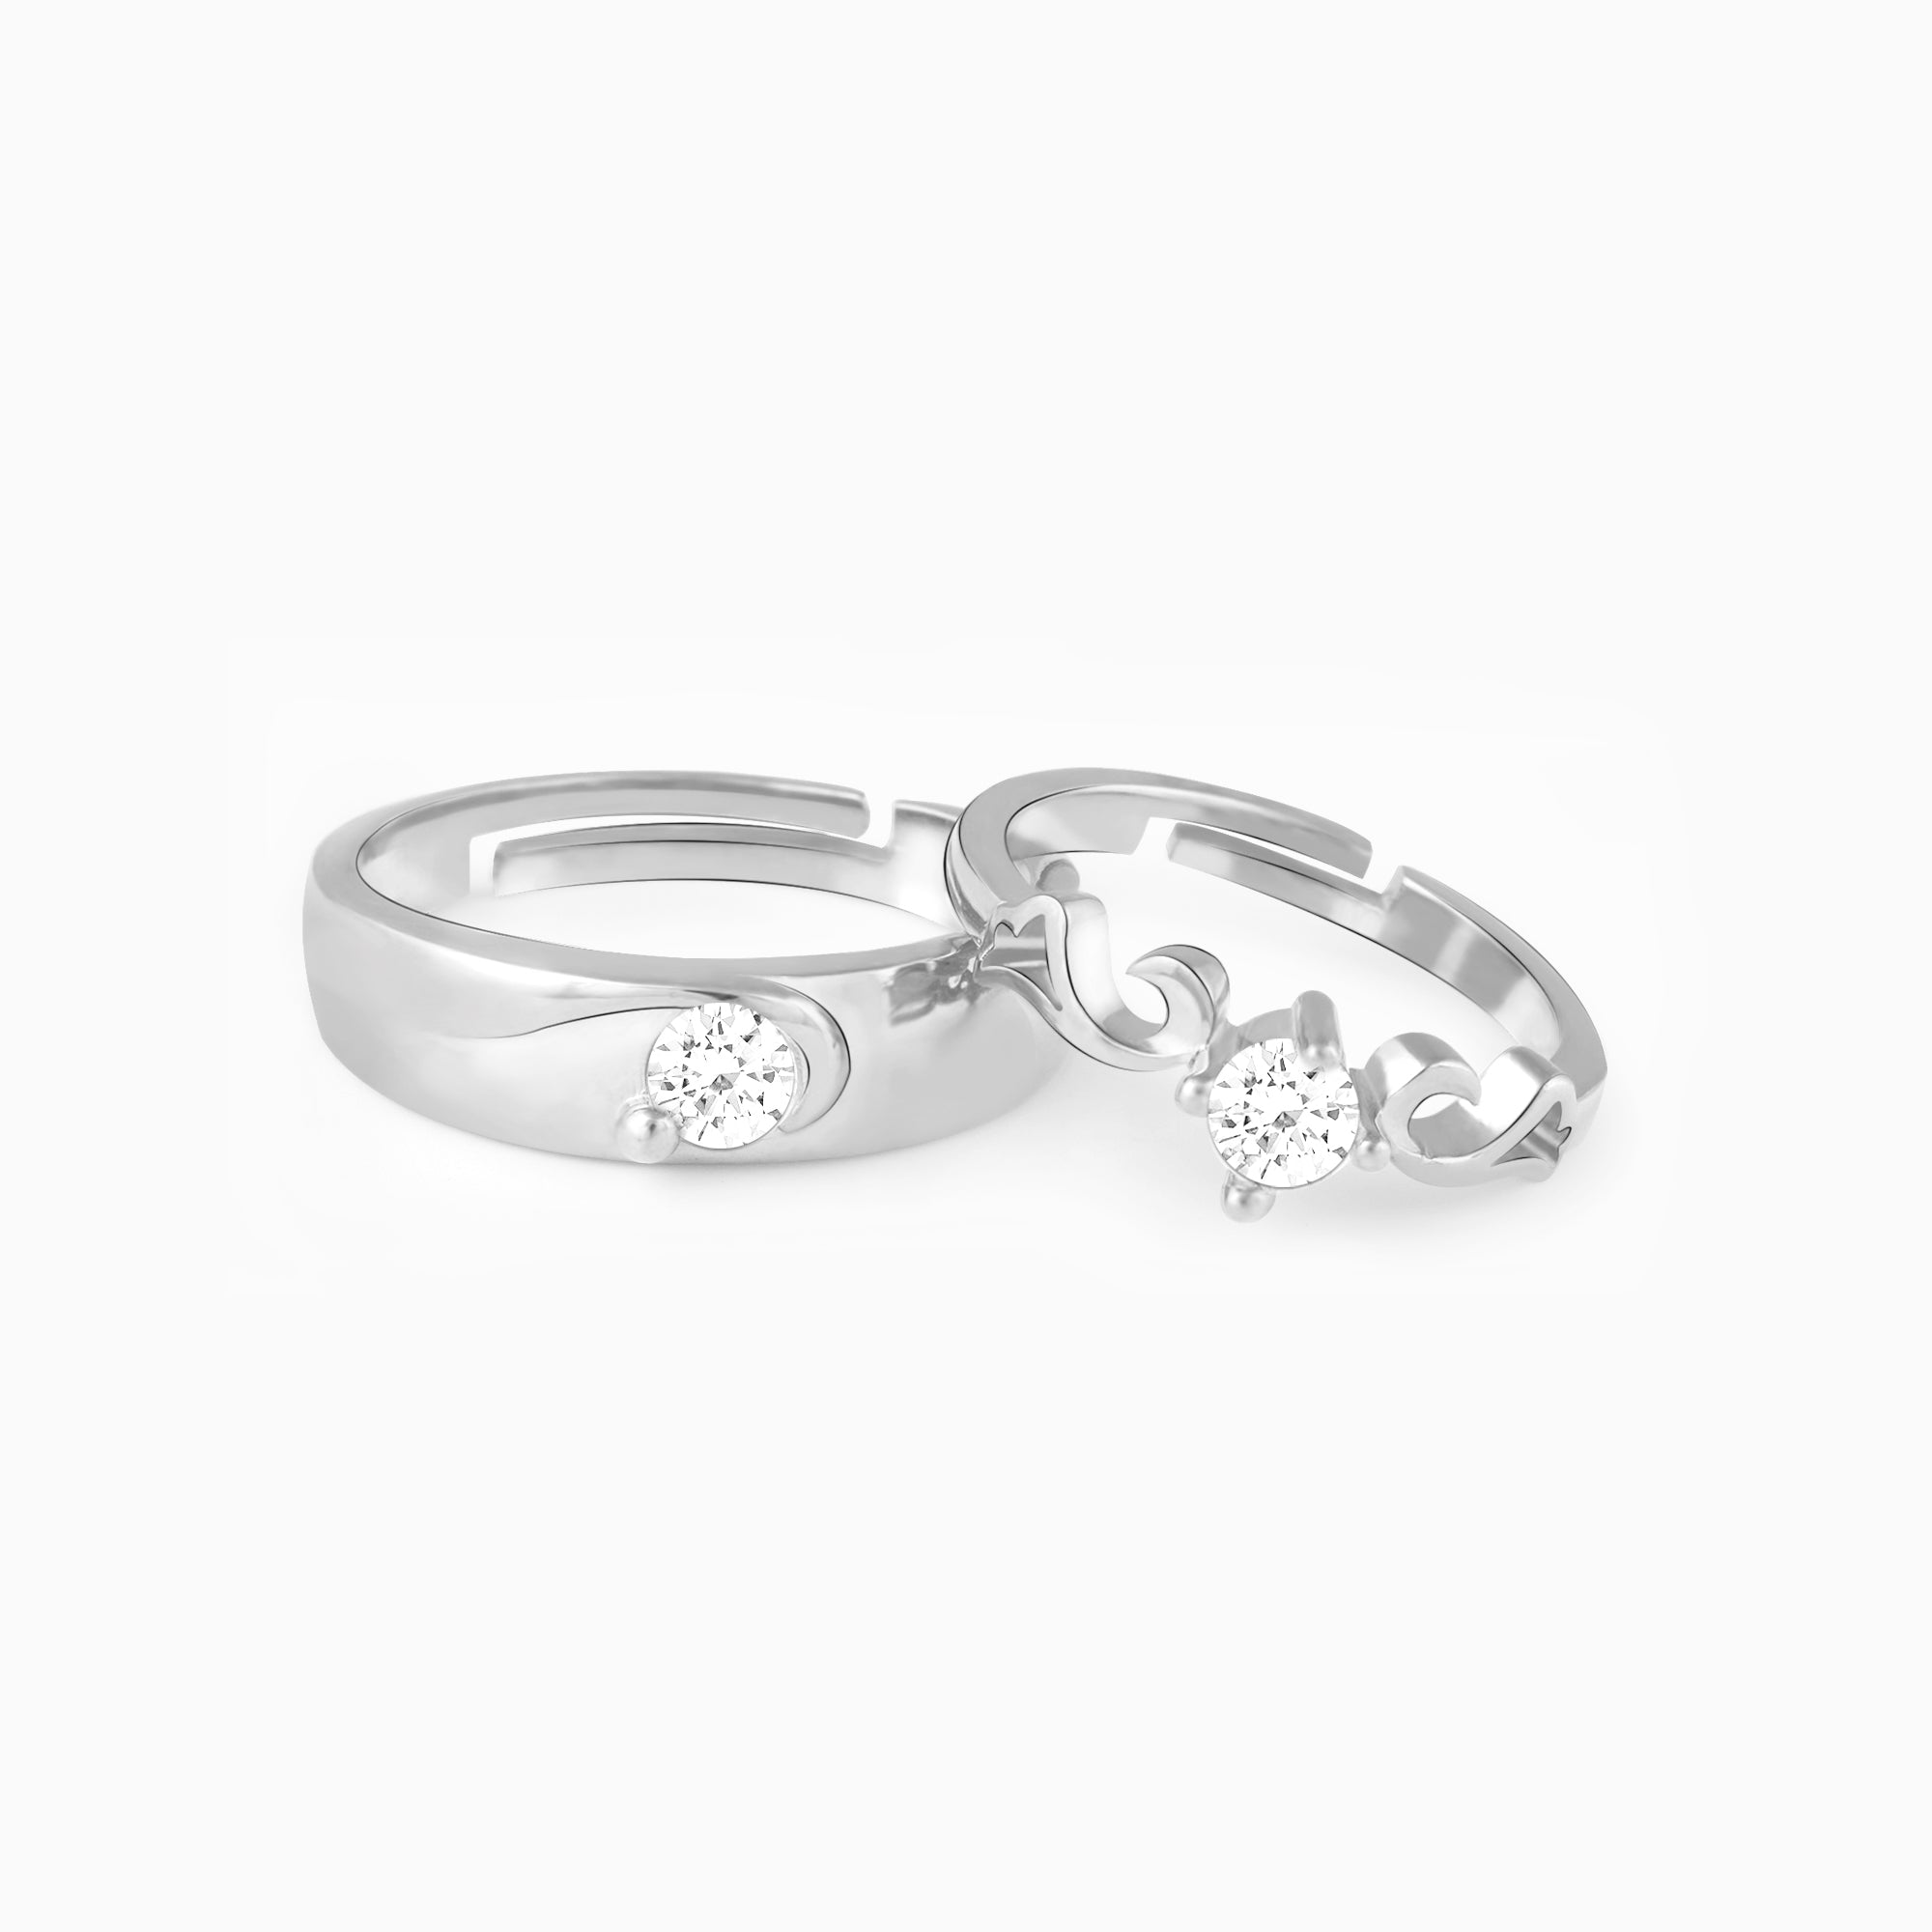 SILVOSWAN Valentine Gifts Adjustable Stylish Couple Ring with Heart Box  Metal Platinum Plated Ring Set Price in India - Buy SILVOSWAN Valentine  Gifts Adjustable Stylish Couple Ring with Heart Box Metal Platinum